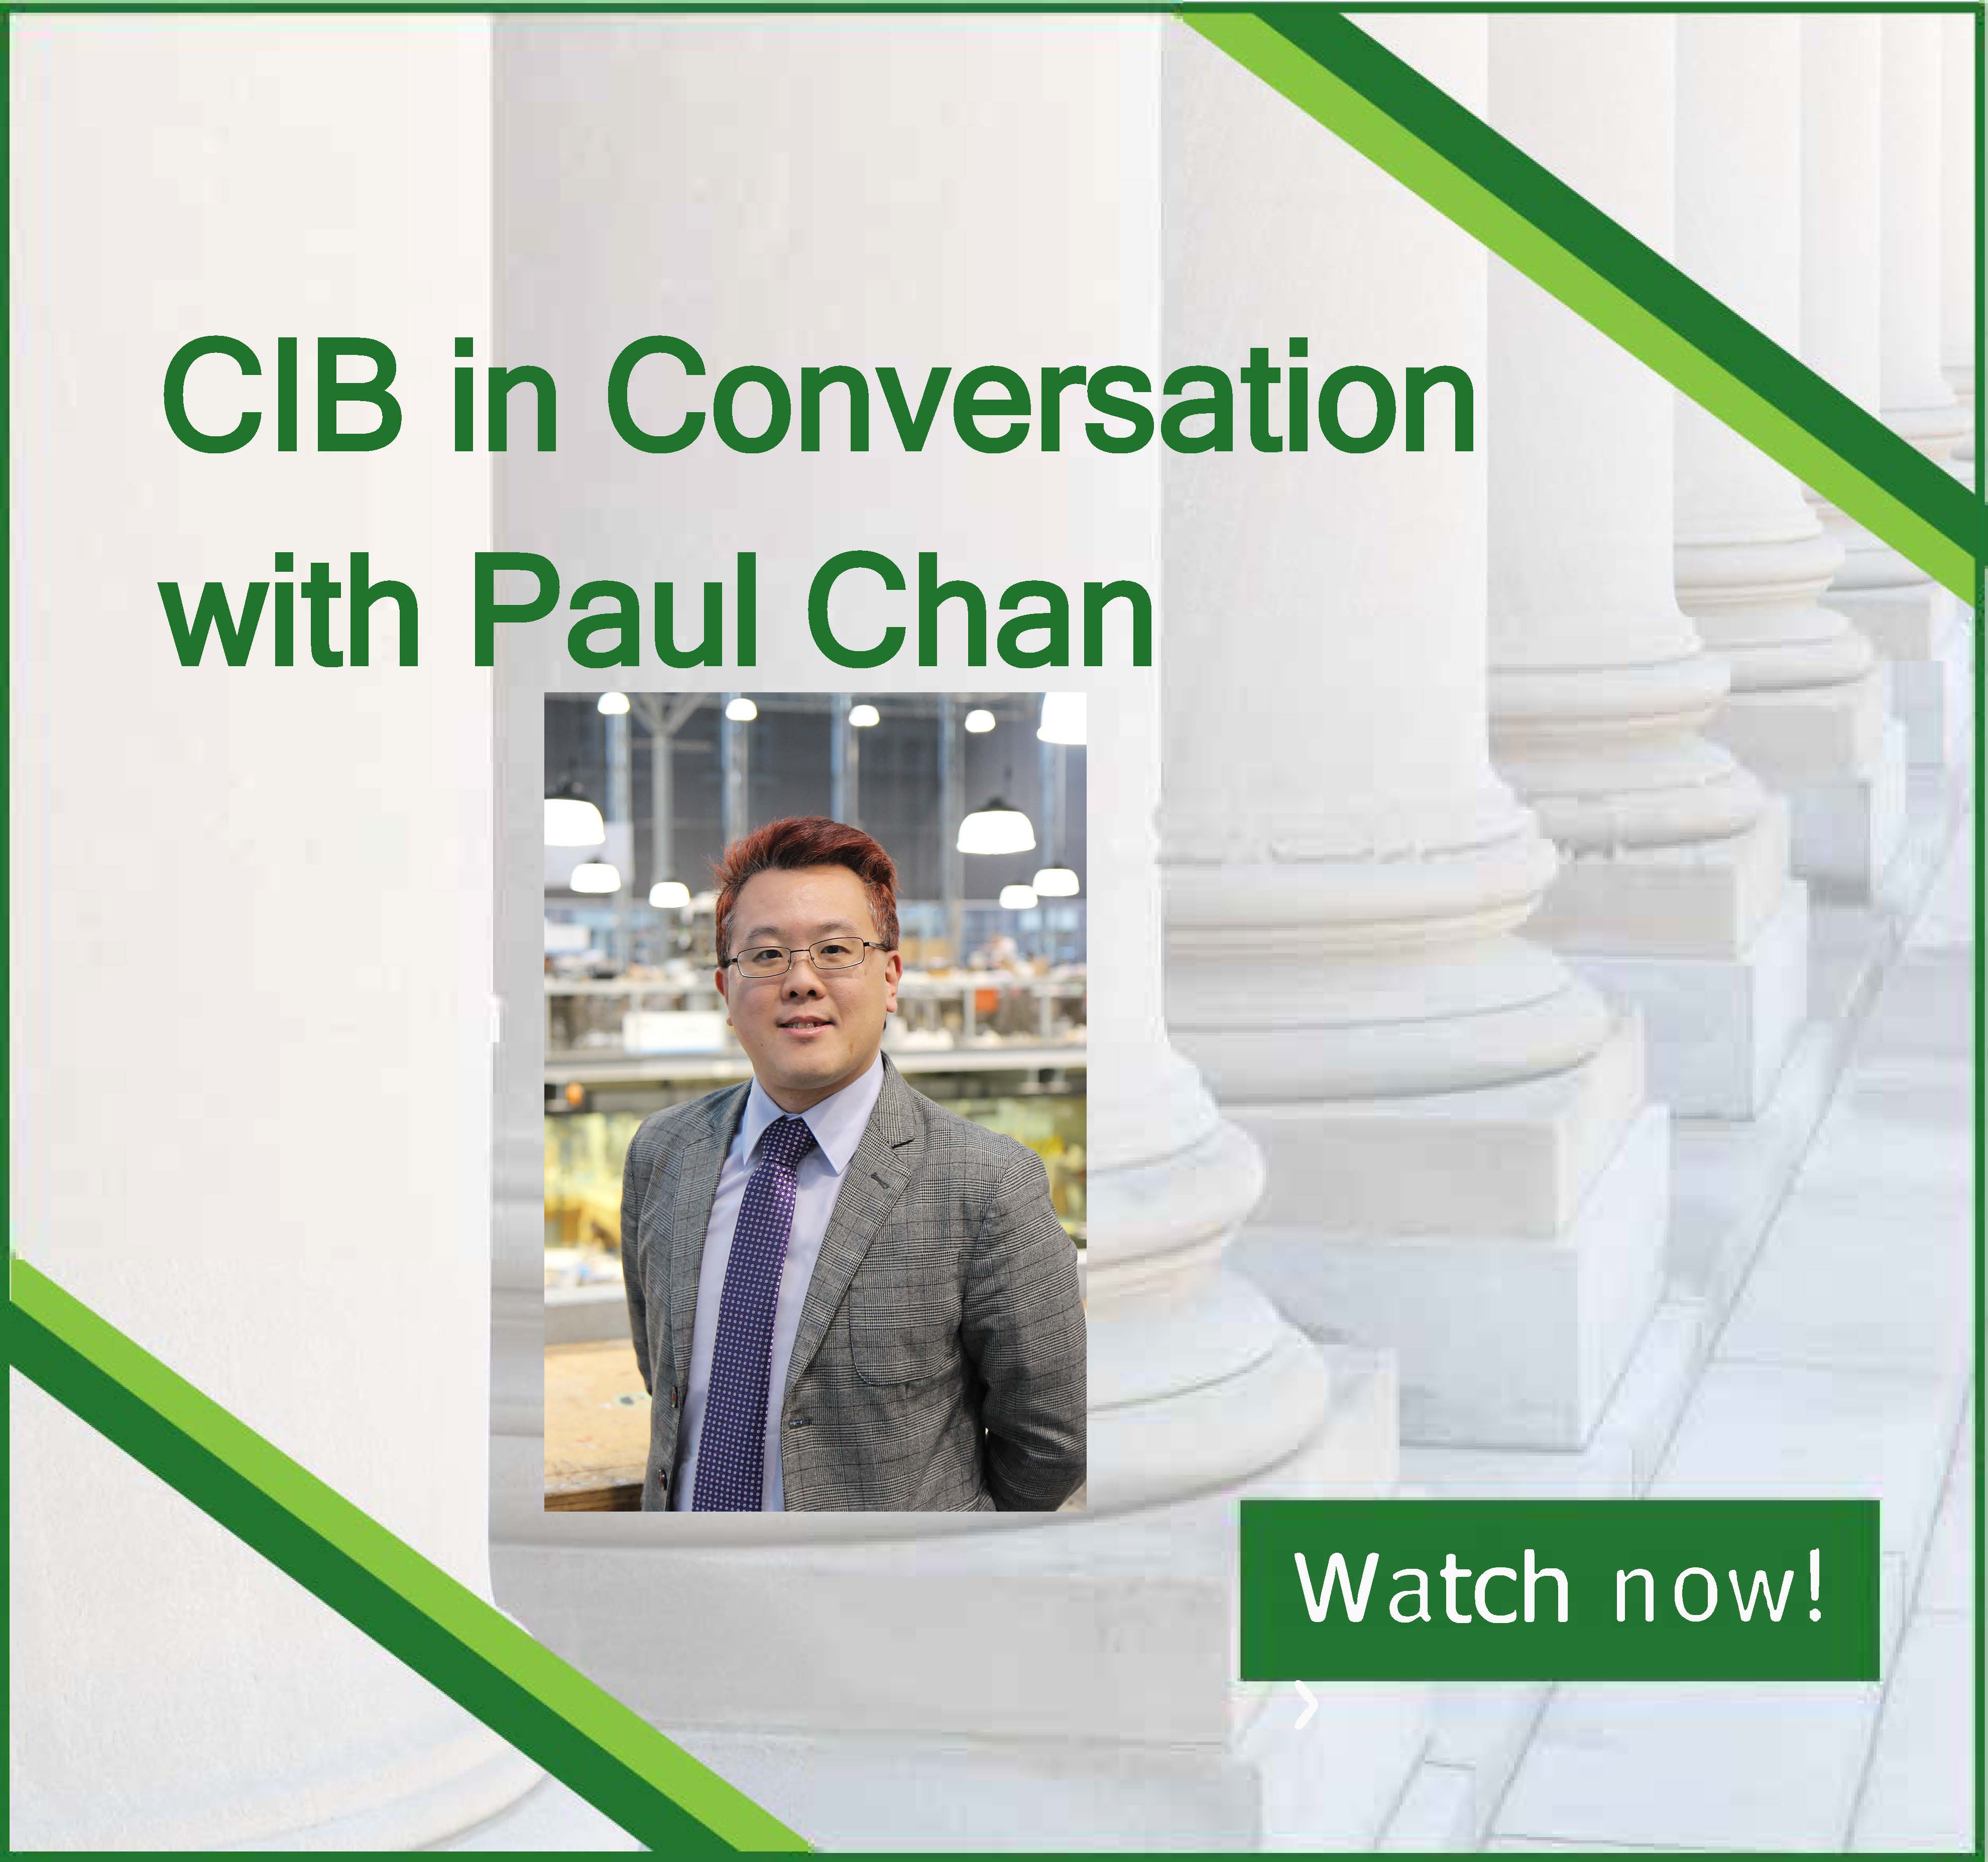 CIB in Conversation with Paul Chan